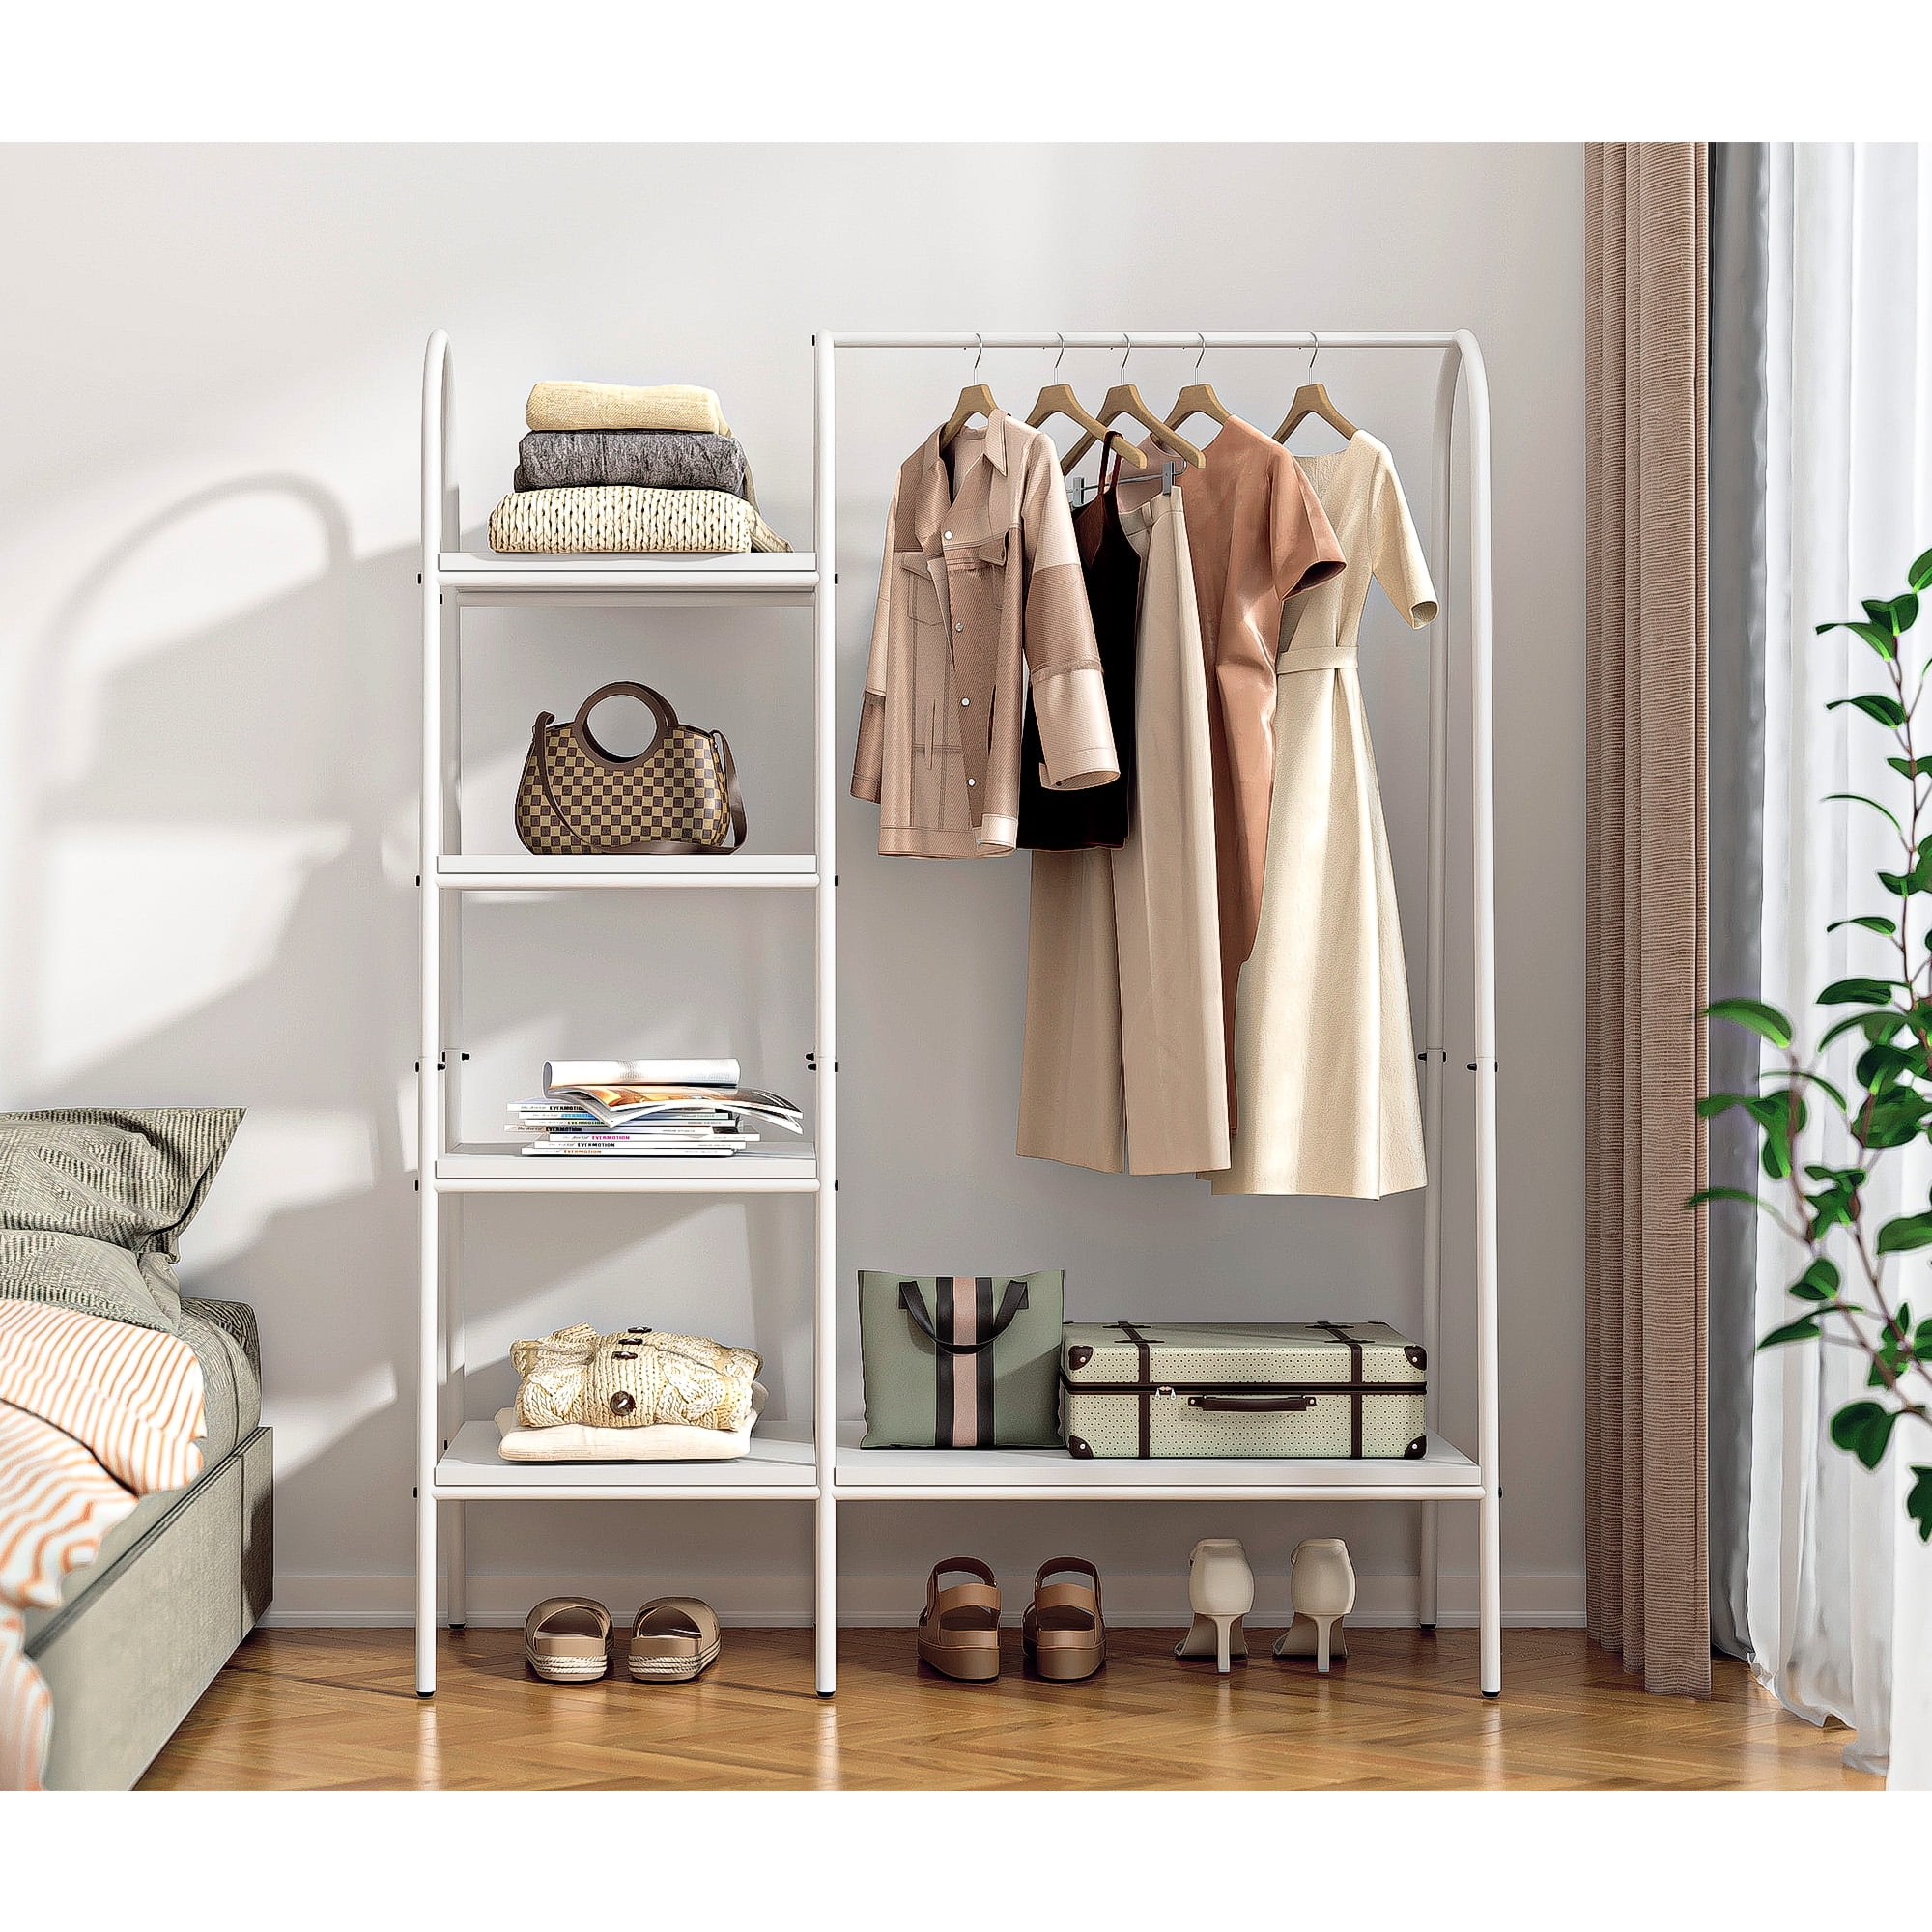 Soges Durable Heavy-Duty Clothes Hanger Rack with Hanging Rod ...